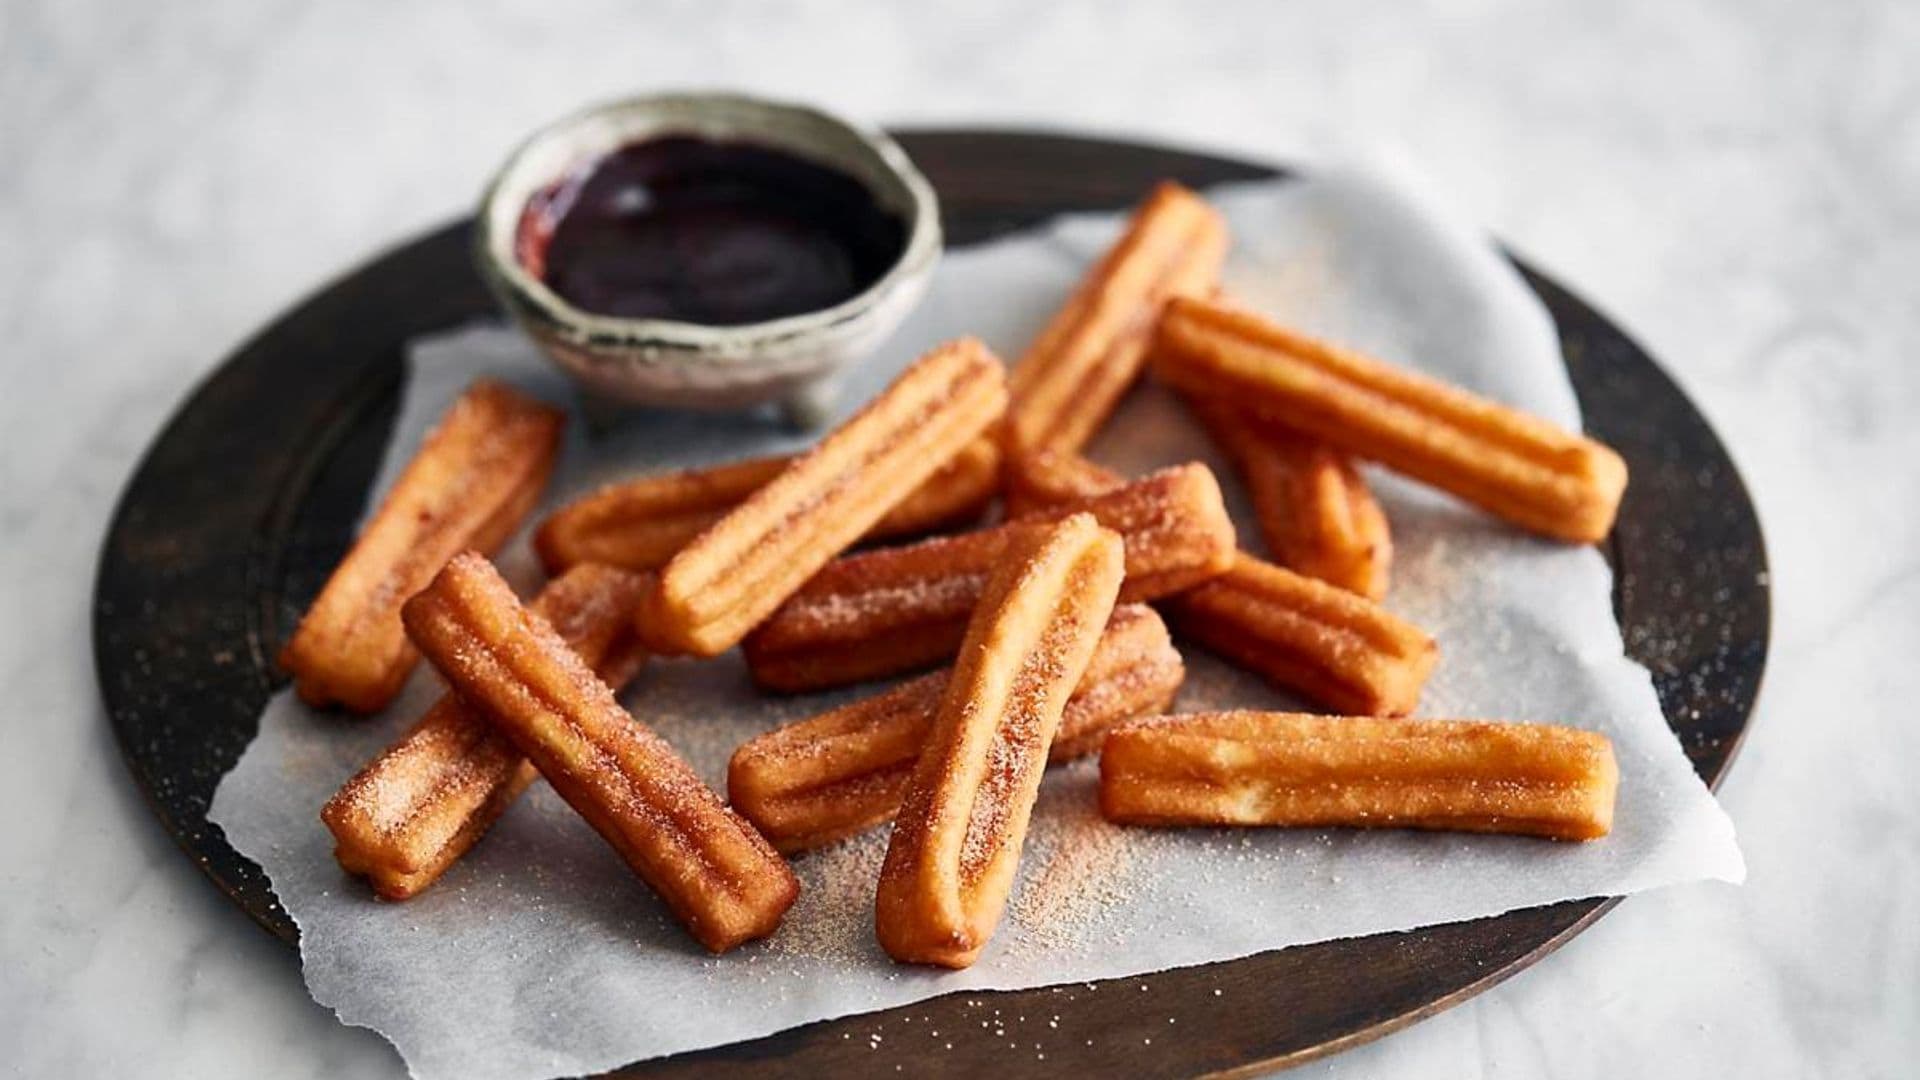 This homemade churros recipe will make you popular among friends and family